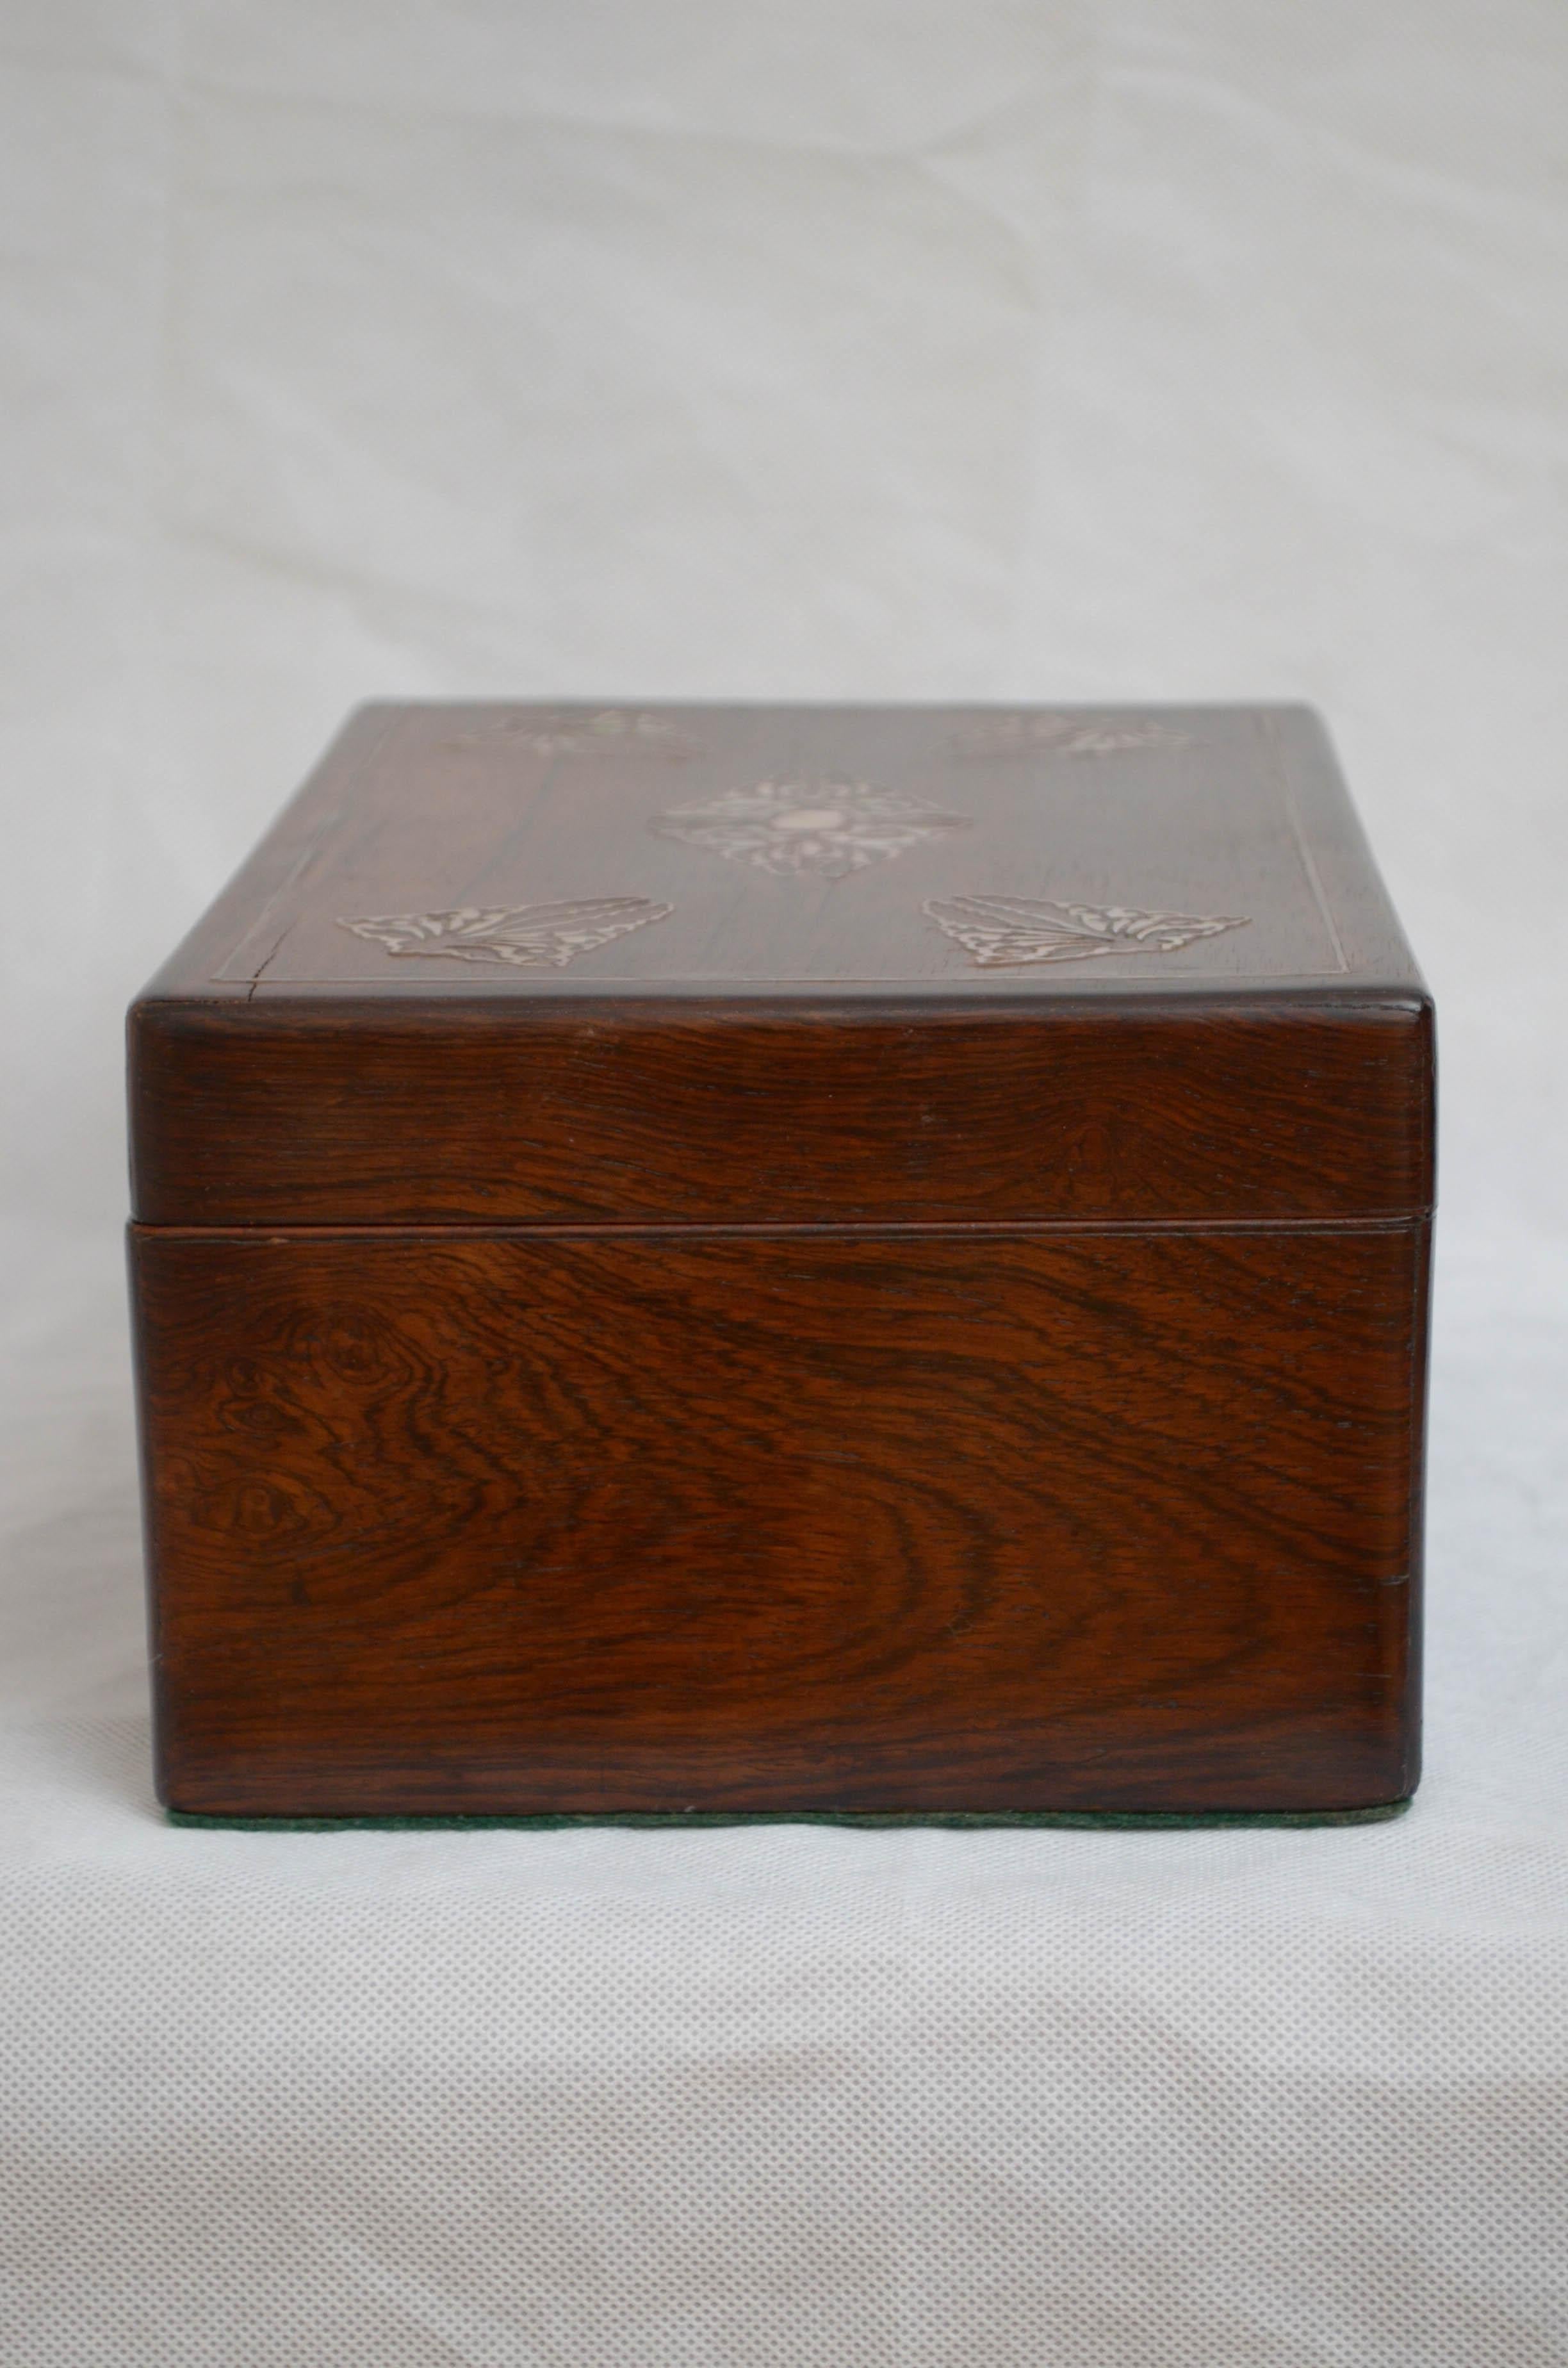 Elegant Early Victorian Jewelry Box with Tray For Sale 4